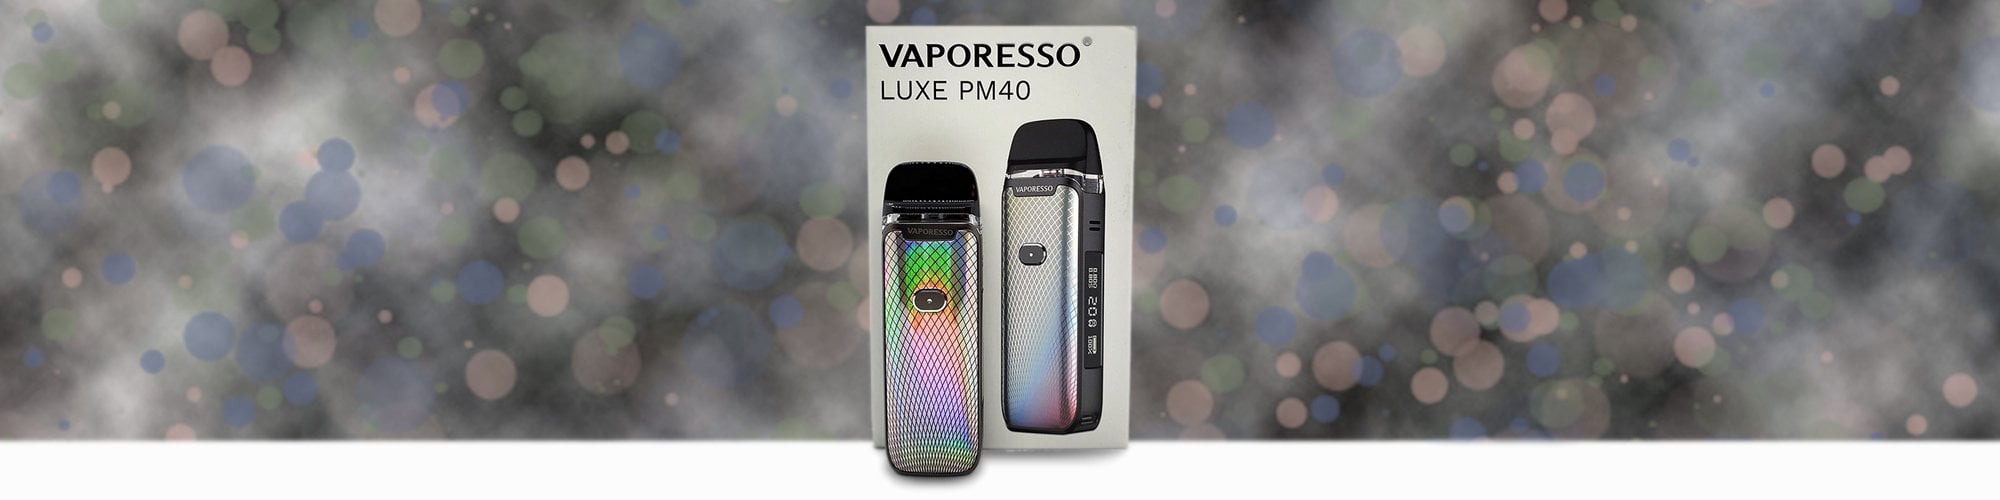 Vaporesso Luxe PM40 Review Main Banner